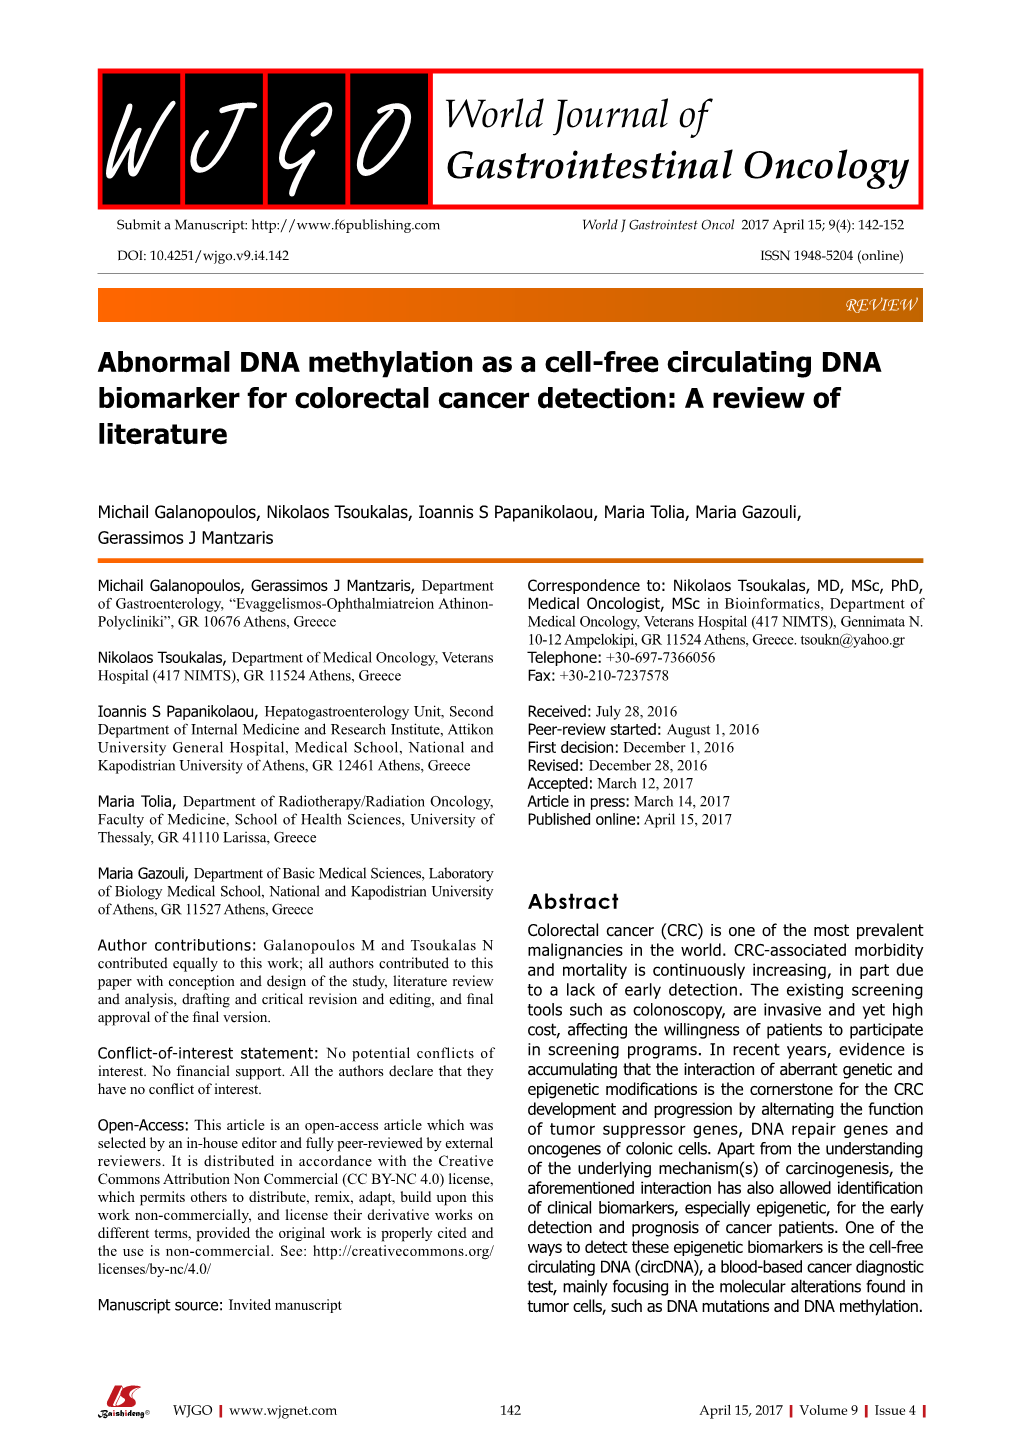 Abnormal DNA Methylation As a Cell-Free Circulating DNA Biomarker for Colorectal Cancer Detection: a Review of Literature